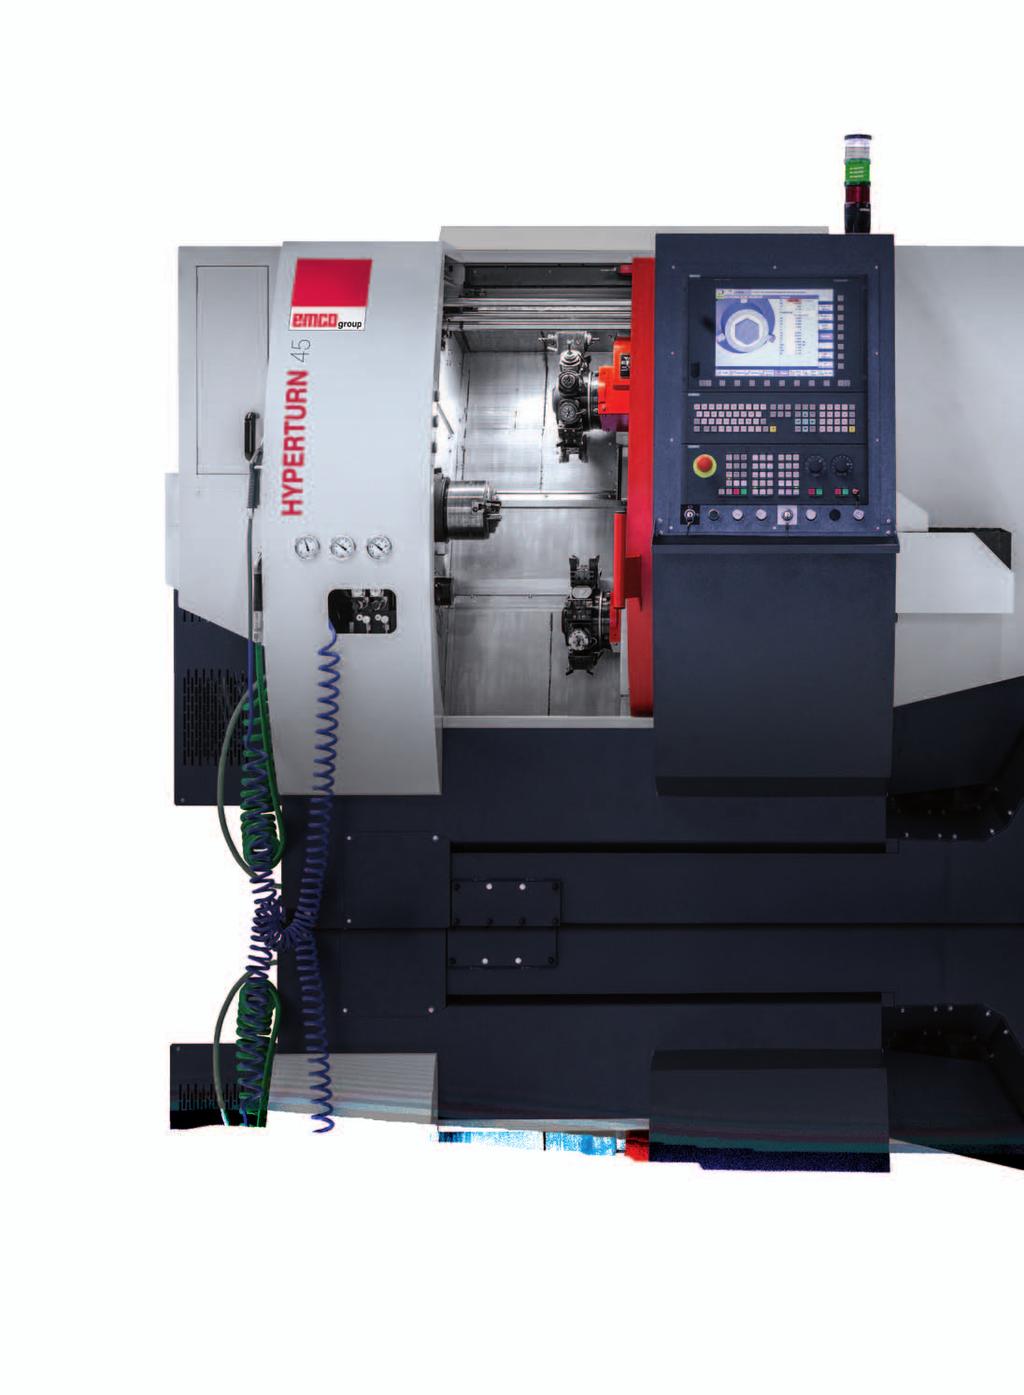 HYPERTURN 45 [Y axis] [Upper tool turret] - 12-station tool turret - VDI25 quick-change system - 12 driven tool stations - Servo-controlled - Rigid tapping - Polygonal turning, etc.